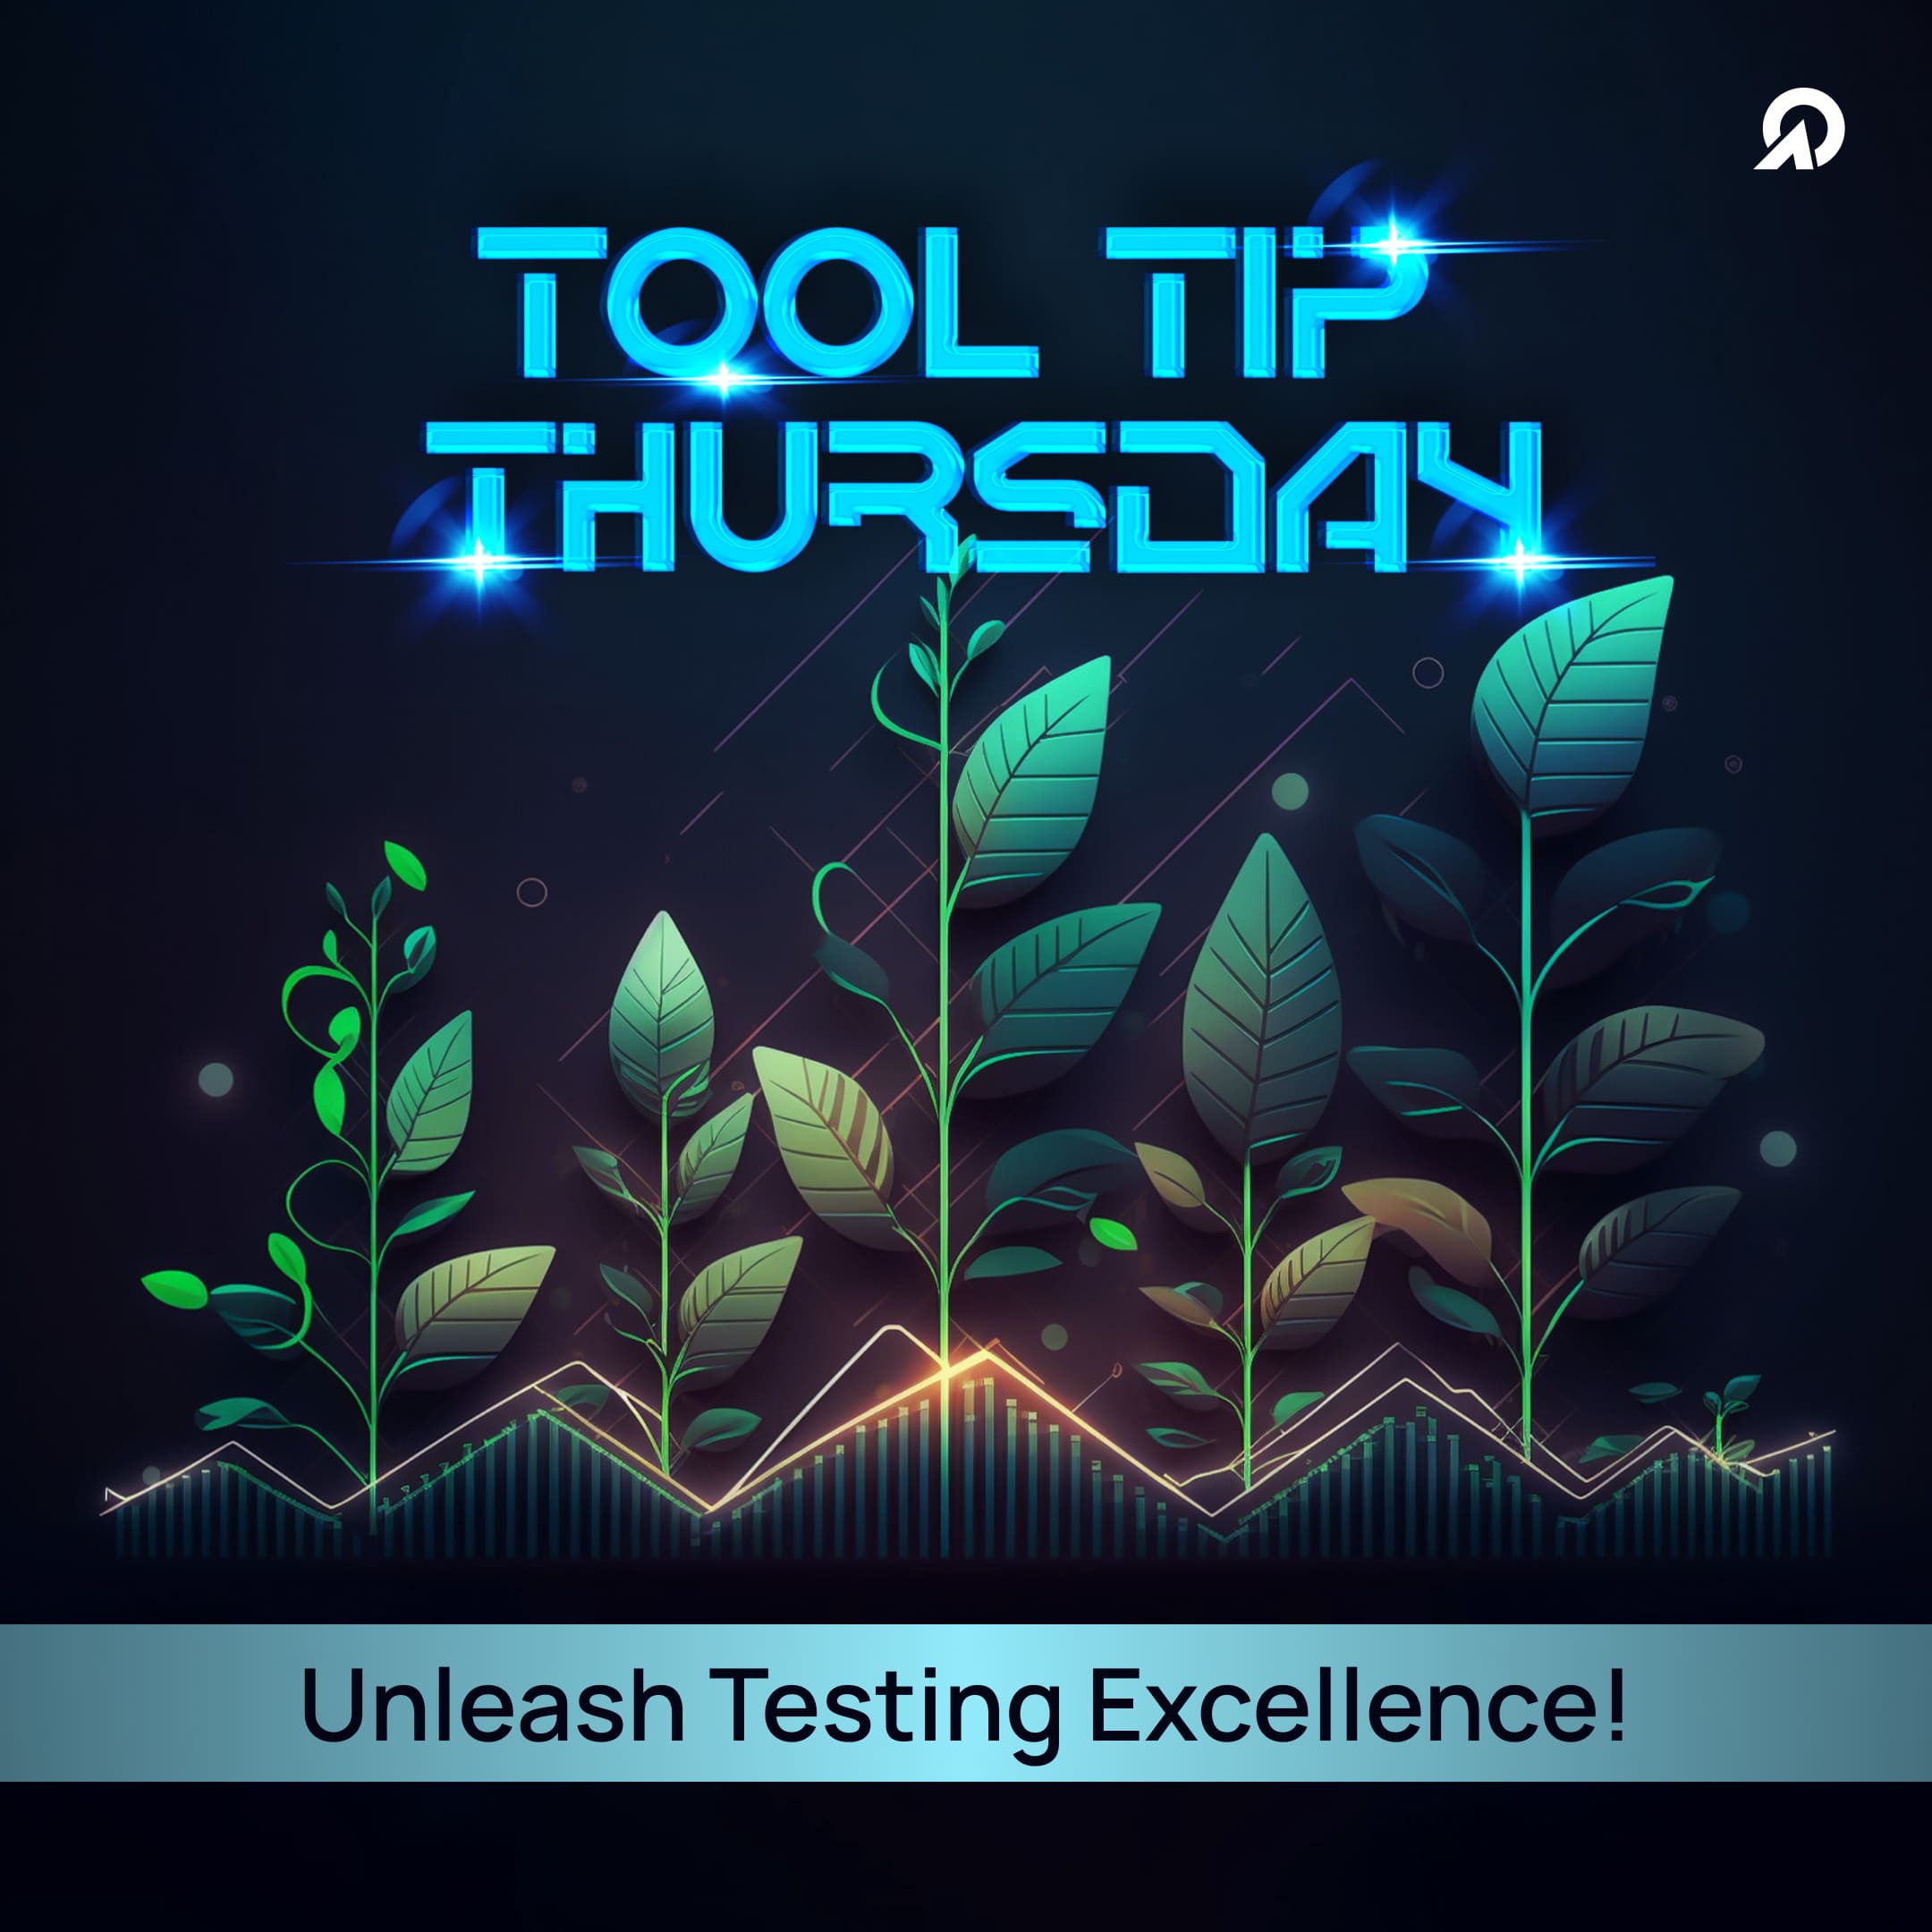 Unleash Testing Excellence